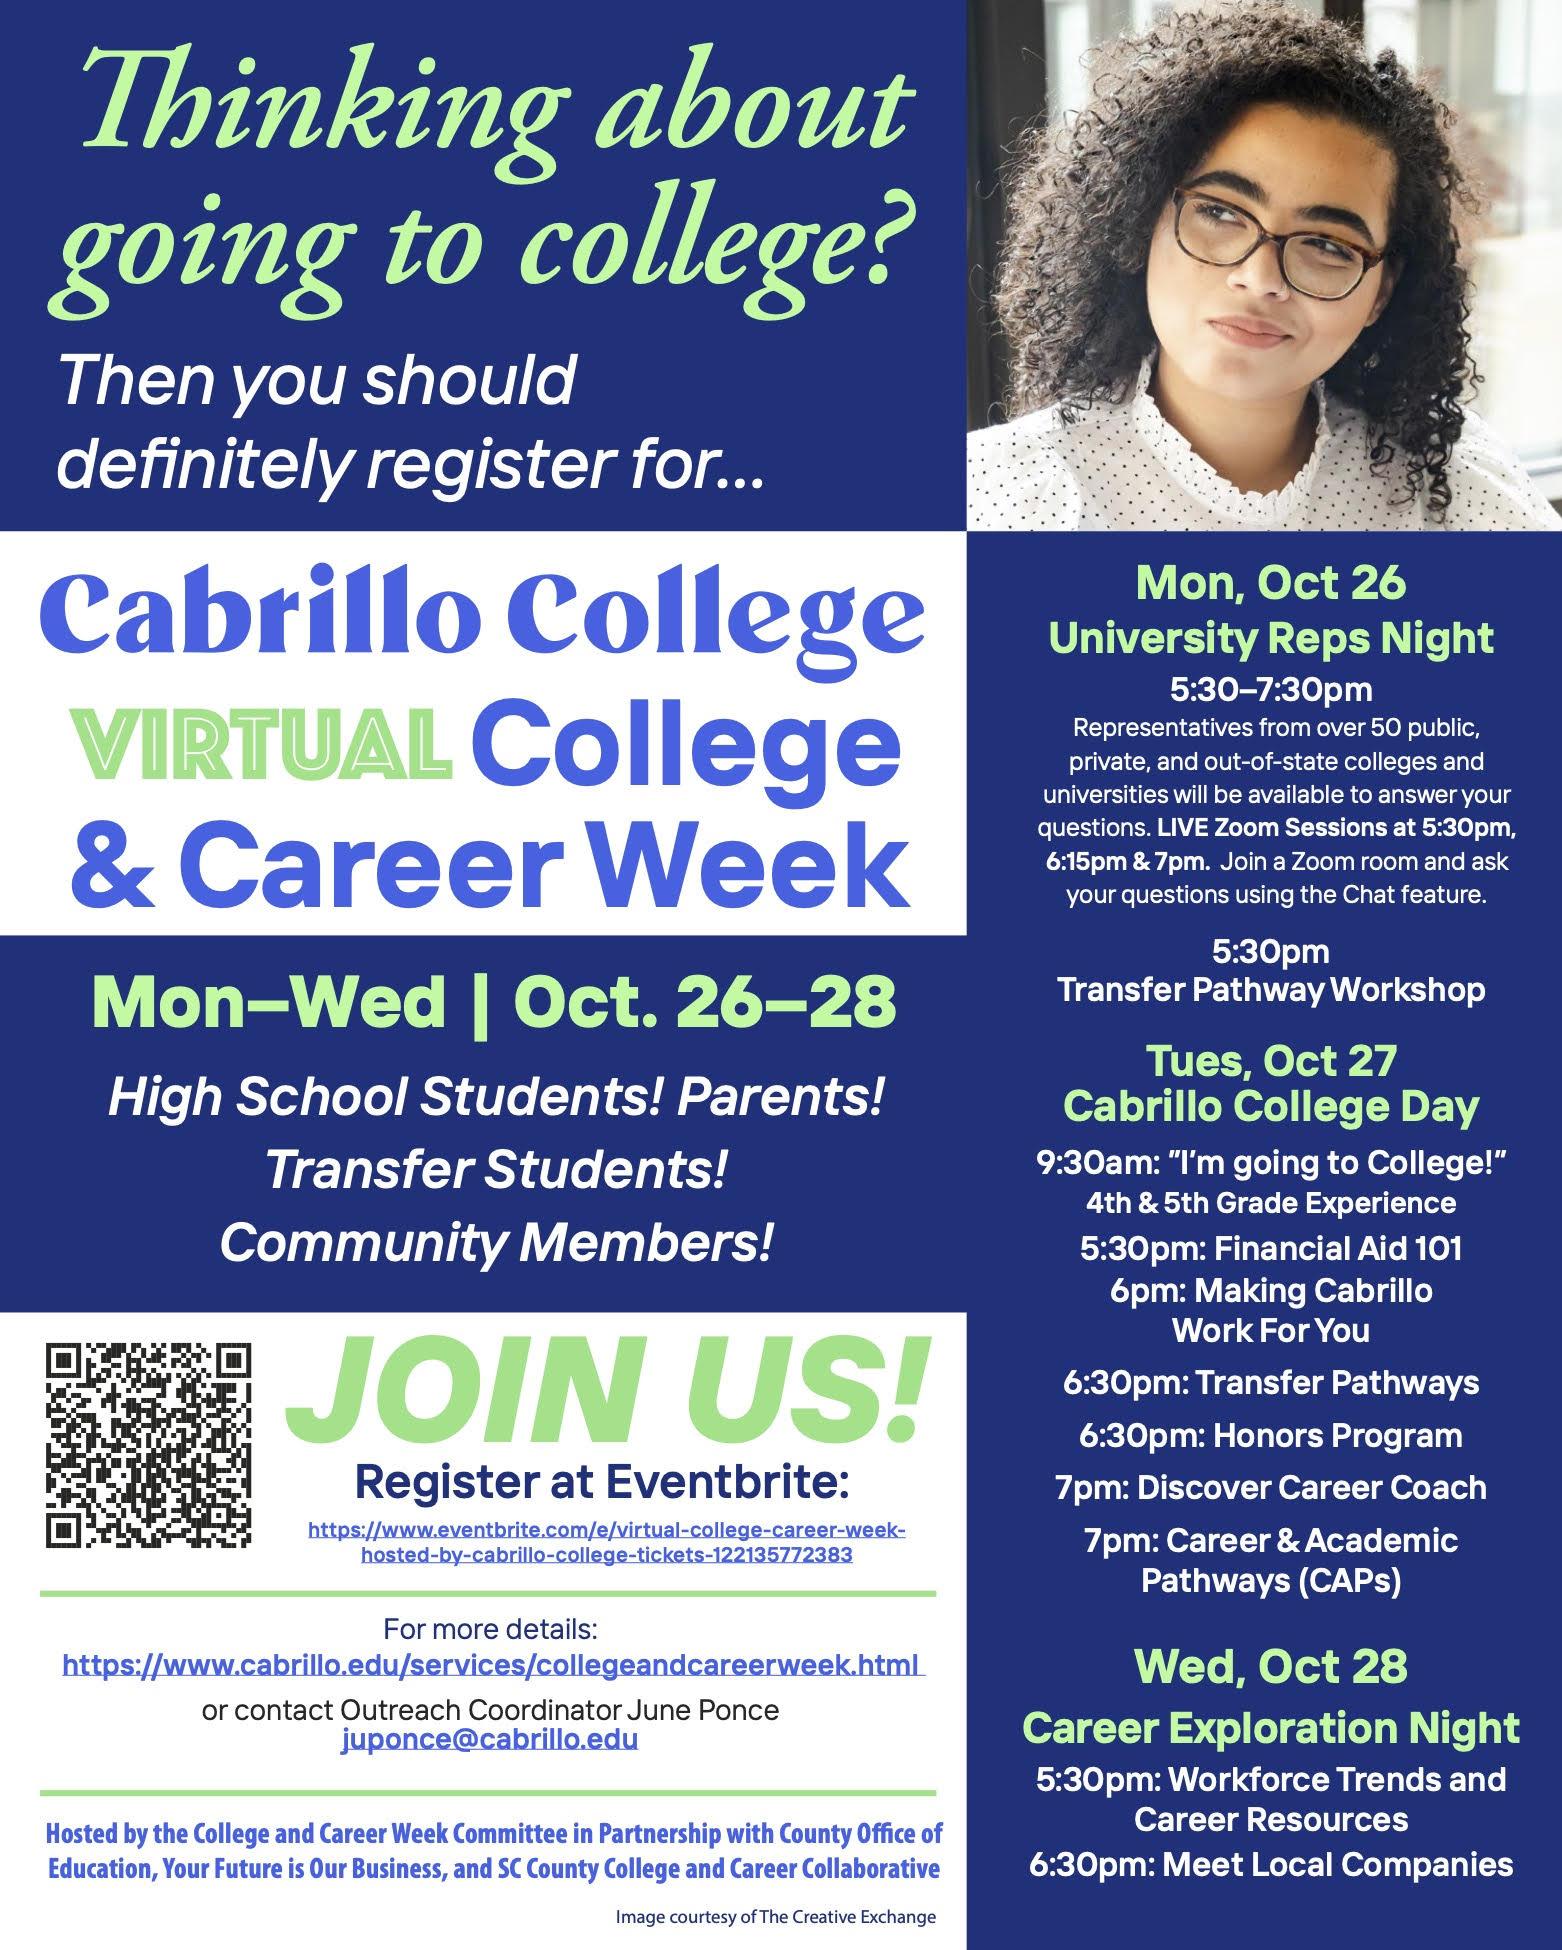 Cabrillo College Virtual College & Career Week; email juponce@cabrillo.edu for details